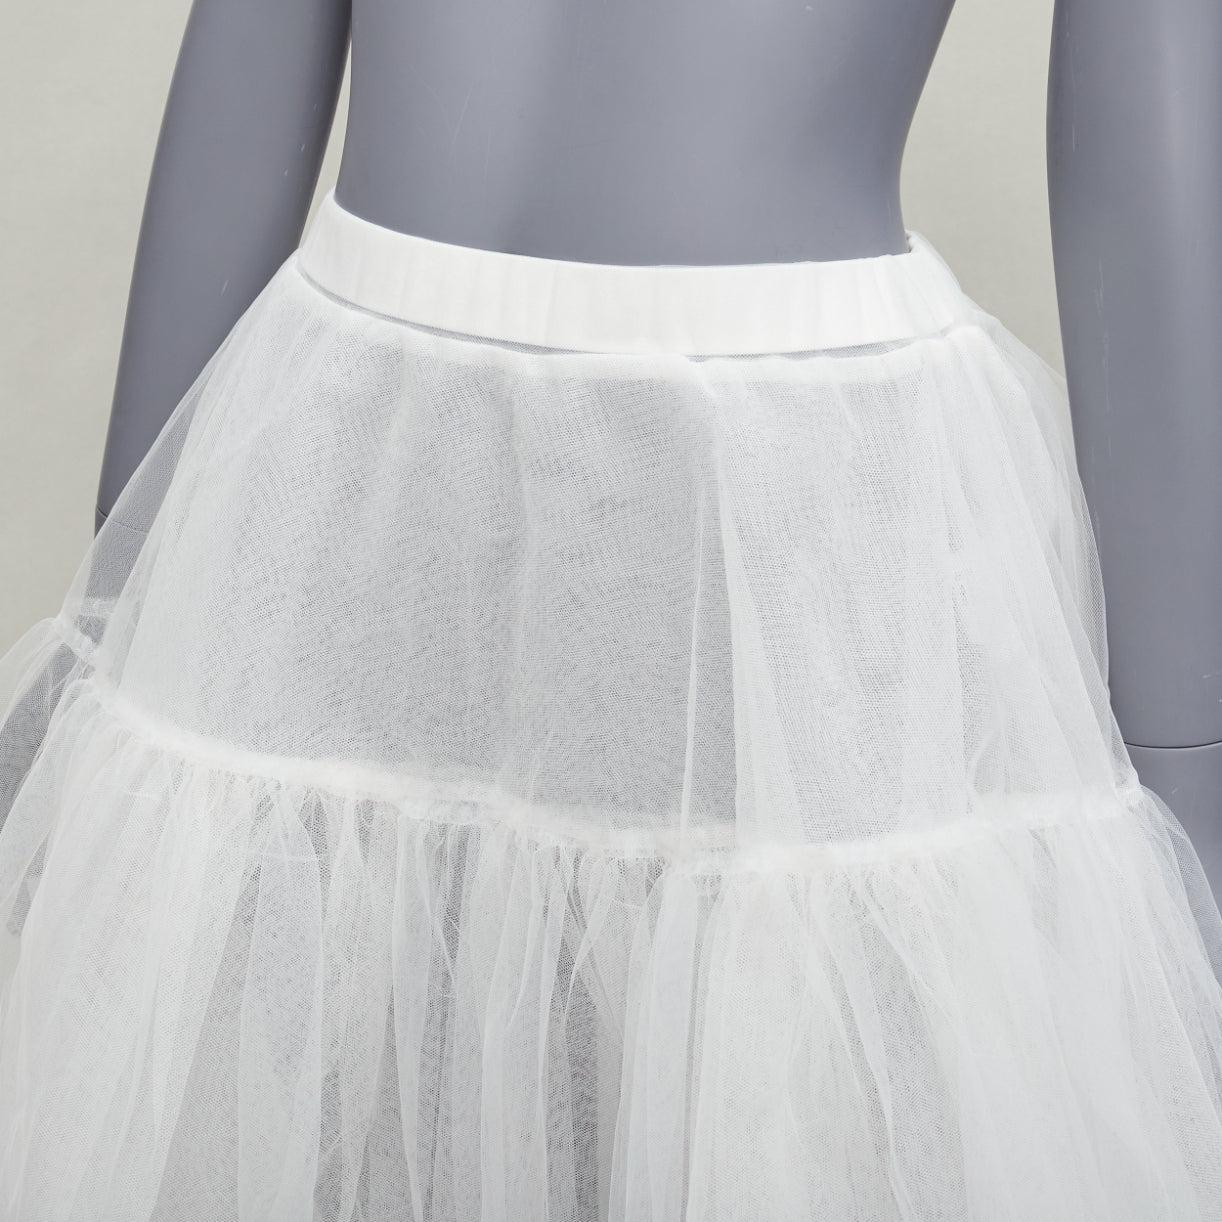 SHUSHU TONG sheer white polyester big tulle midi skirt UK6 XS
Reference: AAWC/A01267
Brand: Shushu Tong
Material: Polyester
Color: White
Pattern: Solid
Closure: Elasticated
Lining: White Polyester
Made in: Shanghai

CONDITION:
Condition: Excellent,